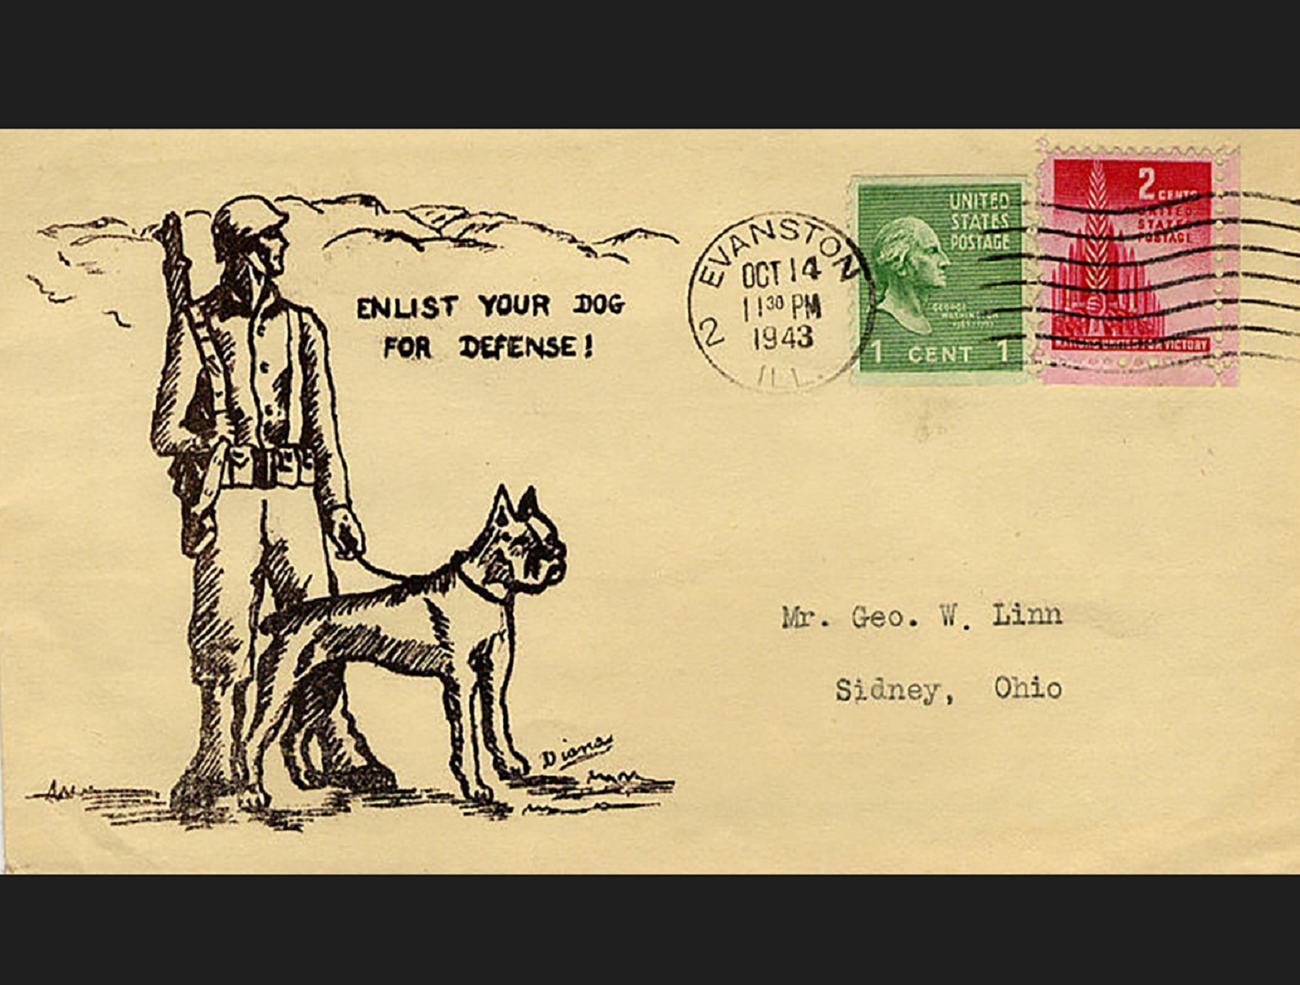 An envelope that has been mailed to Ohio. On the left is a black and white line drawing of a solder with a bulldog on a leash. To the right are the recipient’s address and two cancelled stamps.